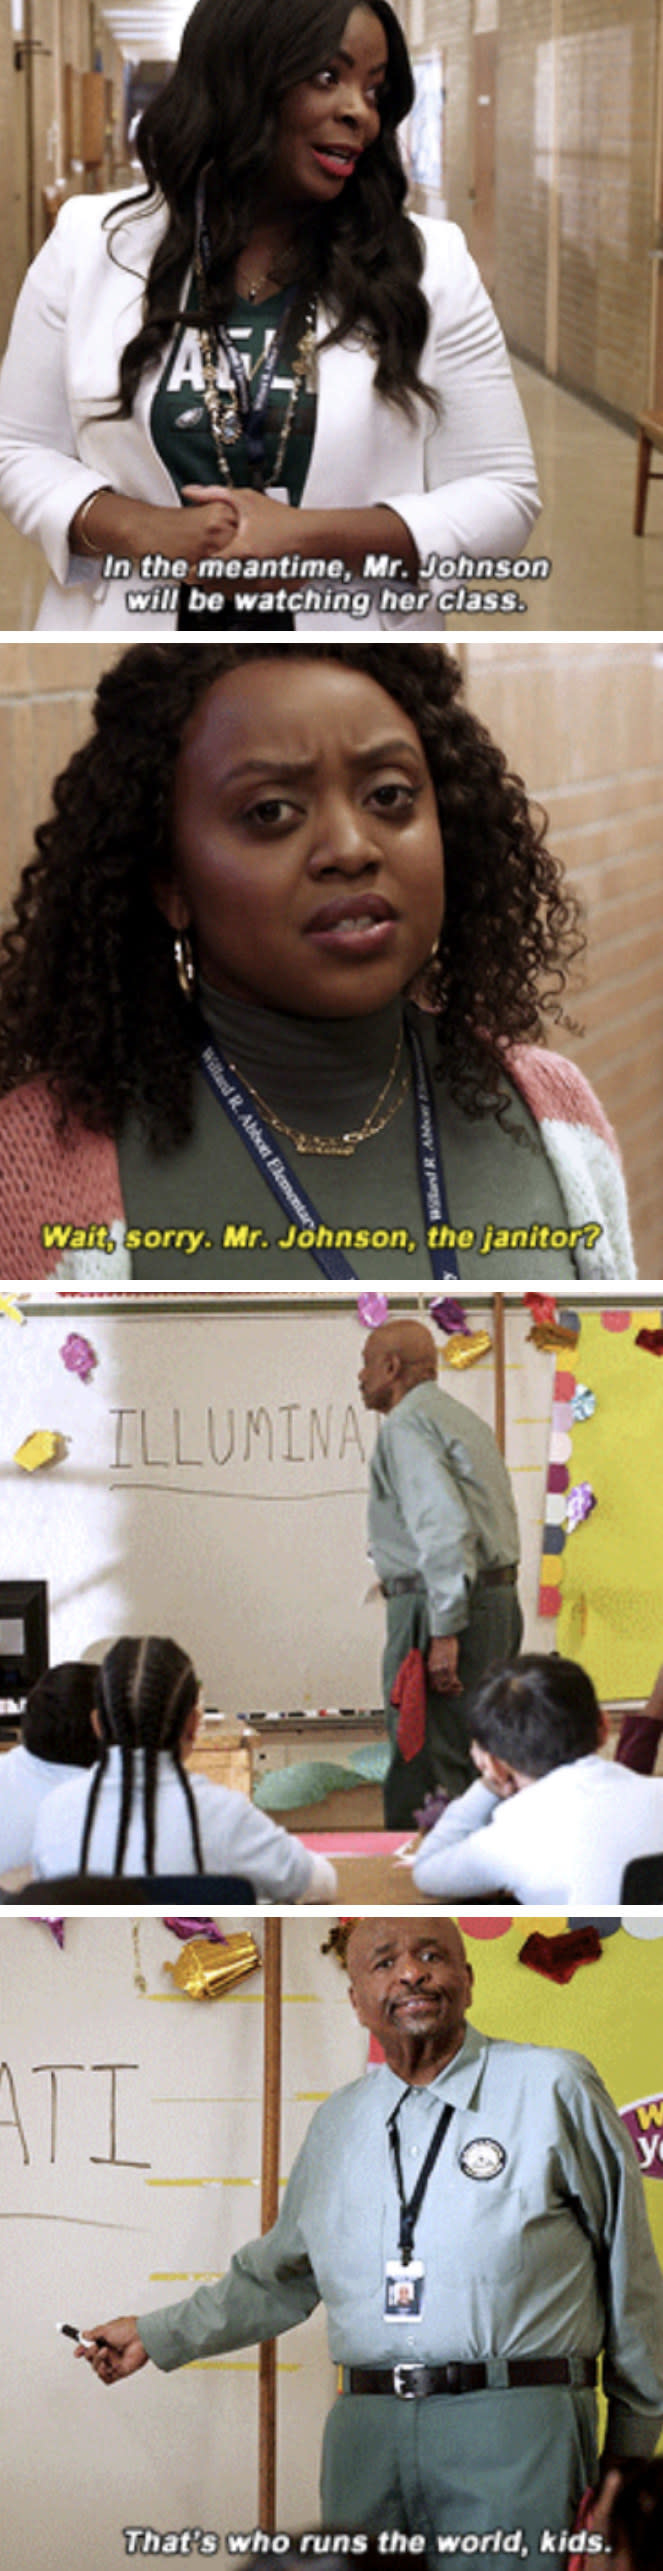 Ava: "In the meantime, Mr. Johnson will be watching her class" Janine: "Wait, sorry. Mr. Johnson, the janitor?" Mr. Johnson: [Pointing at board that reads 'illuminati:' 'That's who runs the world, kids"